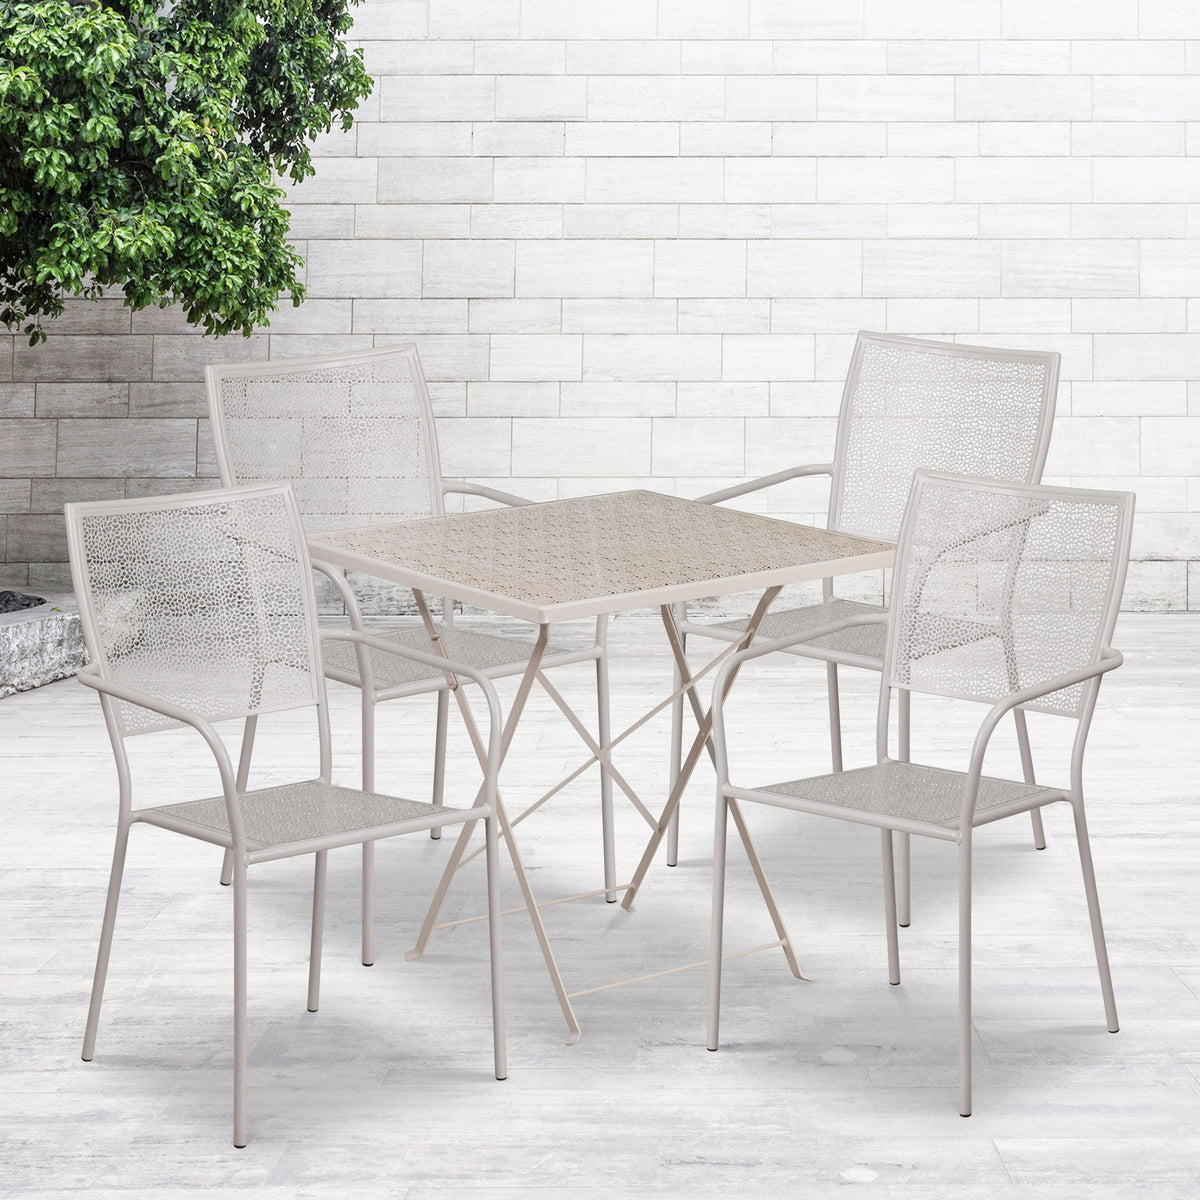 Light Gray |#| 28inch Square Lt Gray Indoor-Outdoor Steel Folding Patio Table Set with 4 Chairs